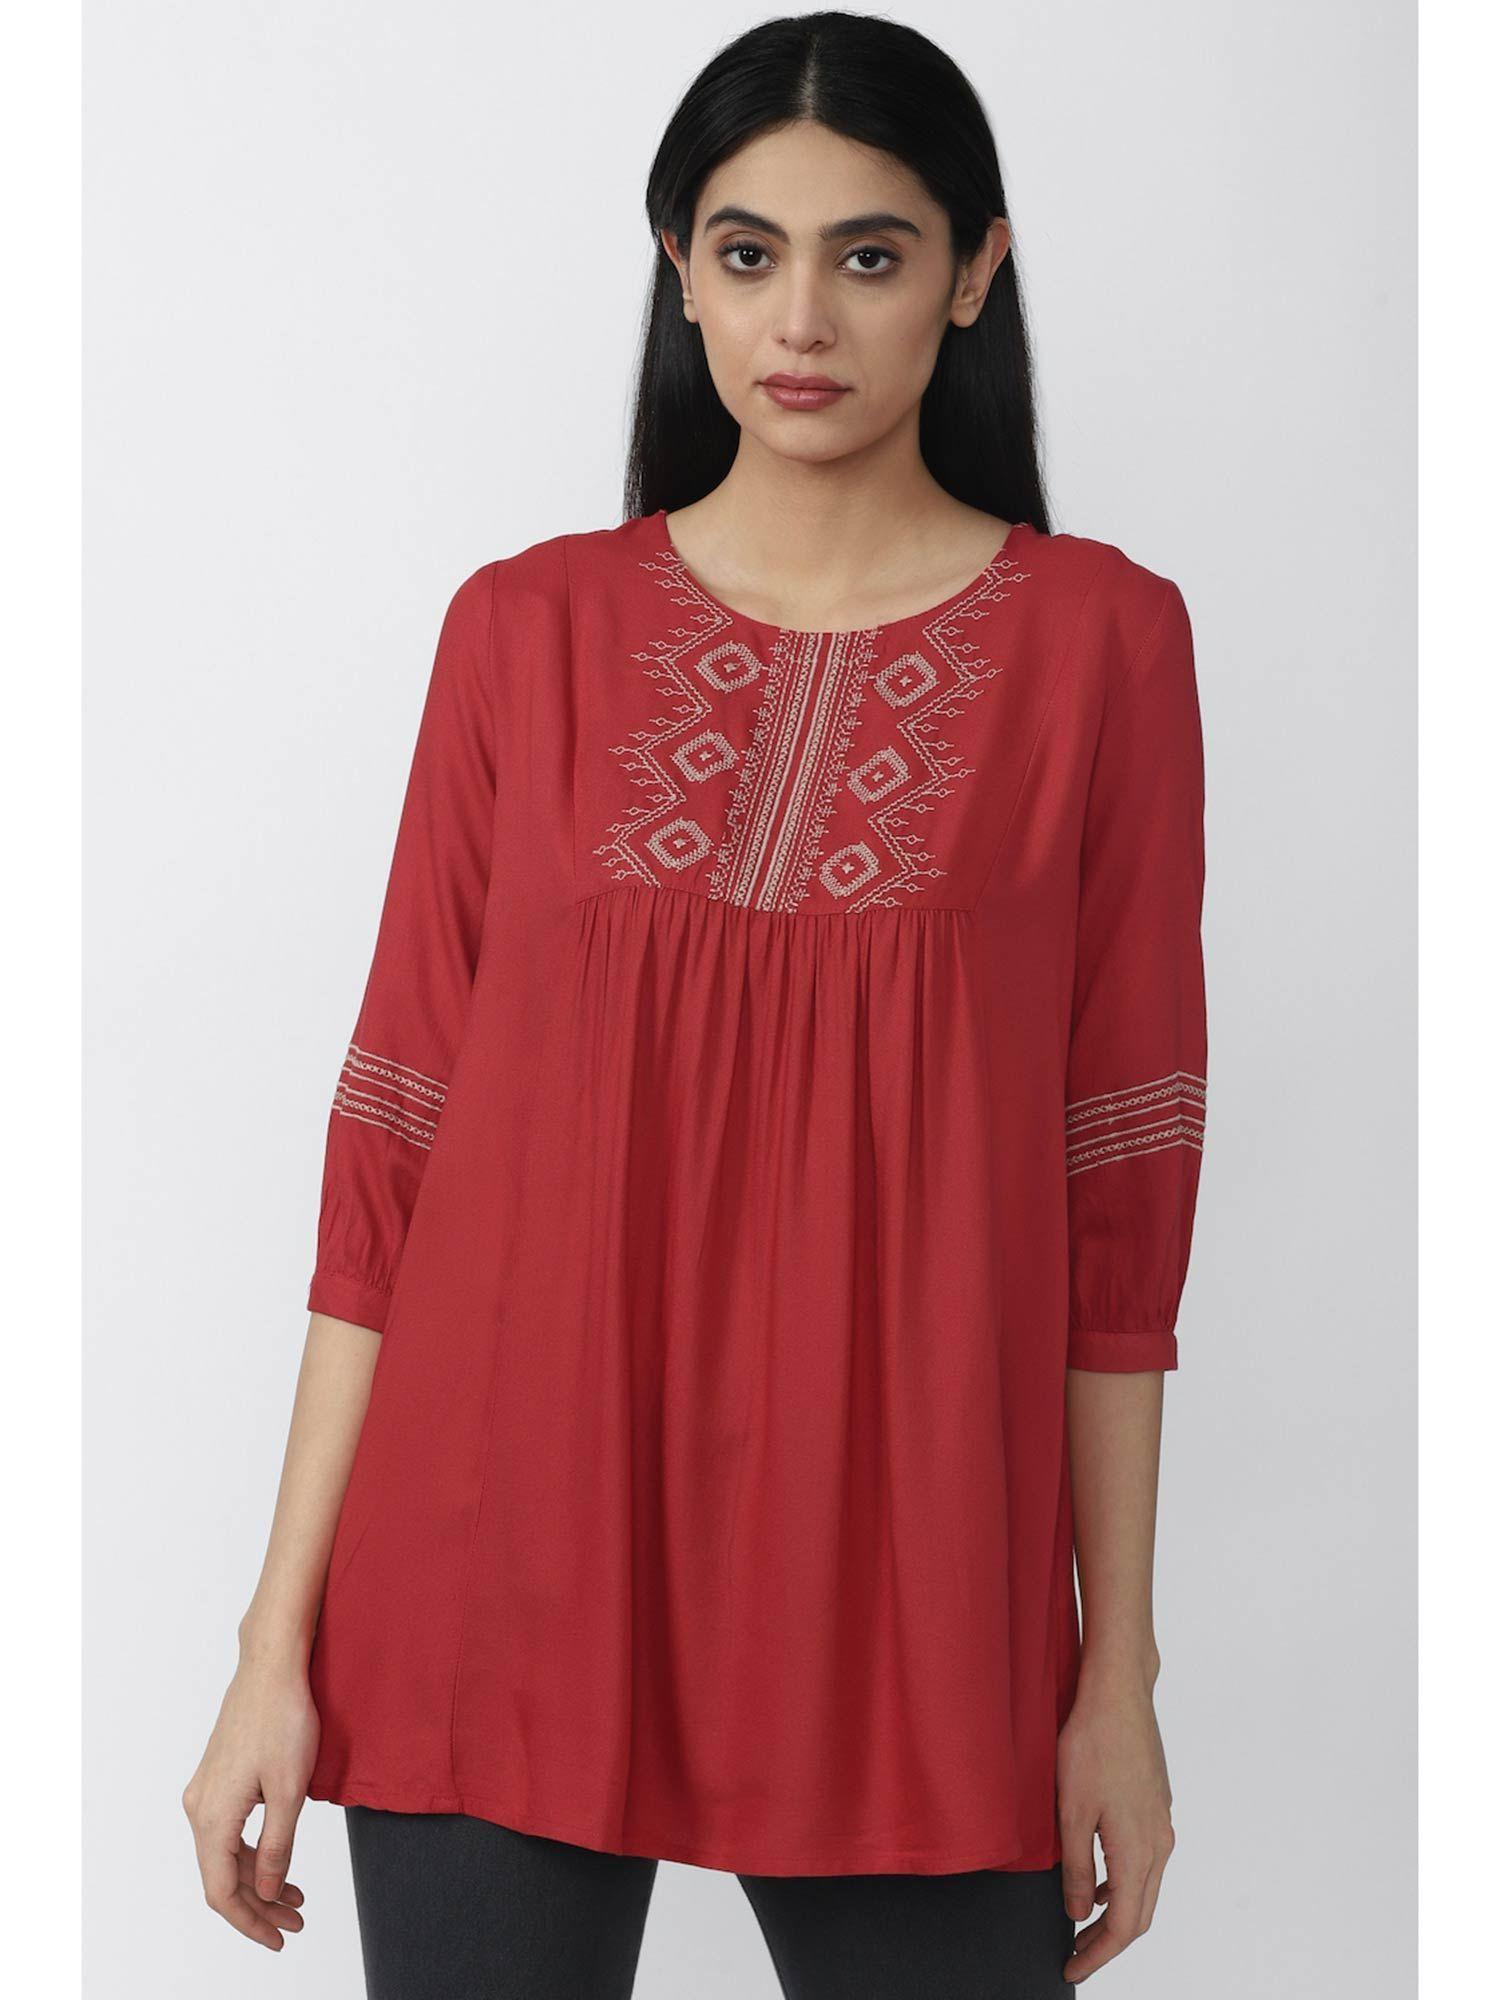 red tunic top